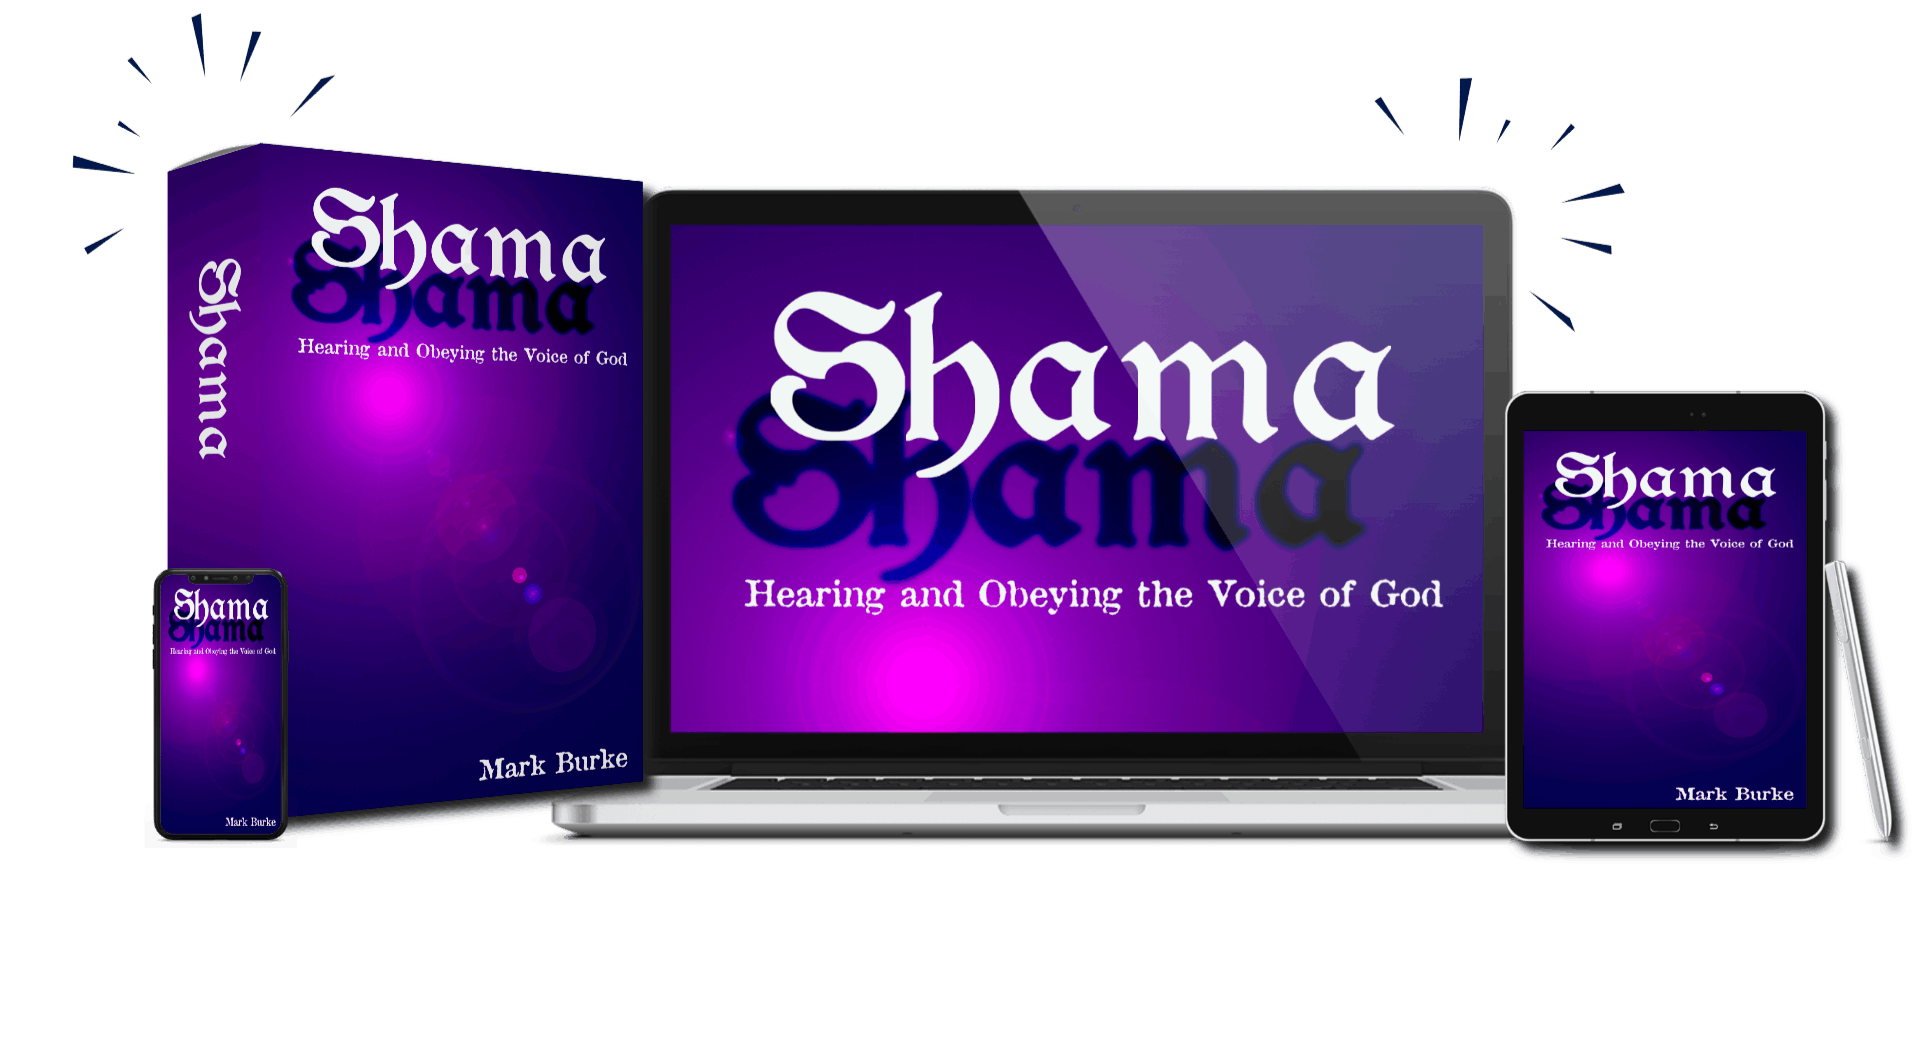 Shama -Hearing and Obeying the Voice of God